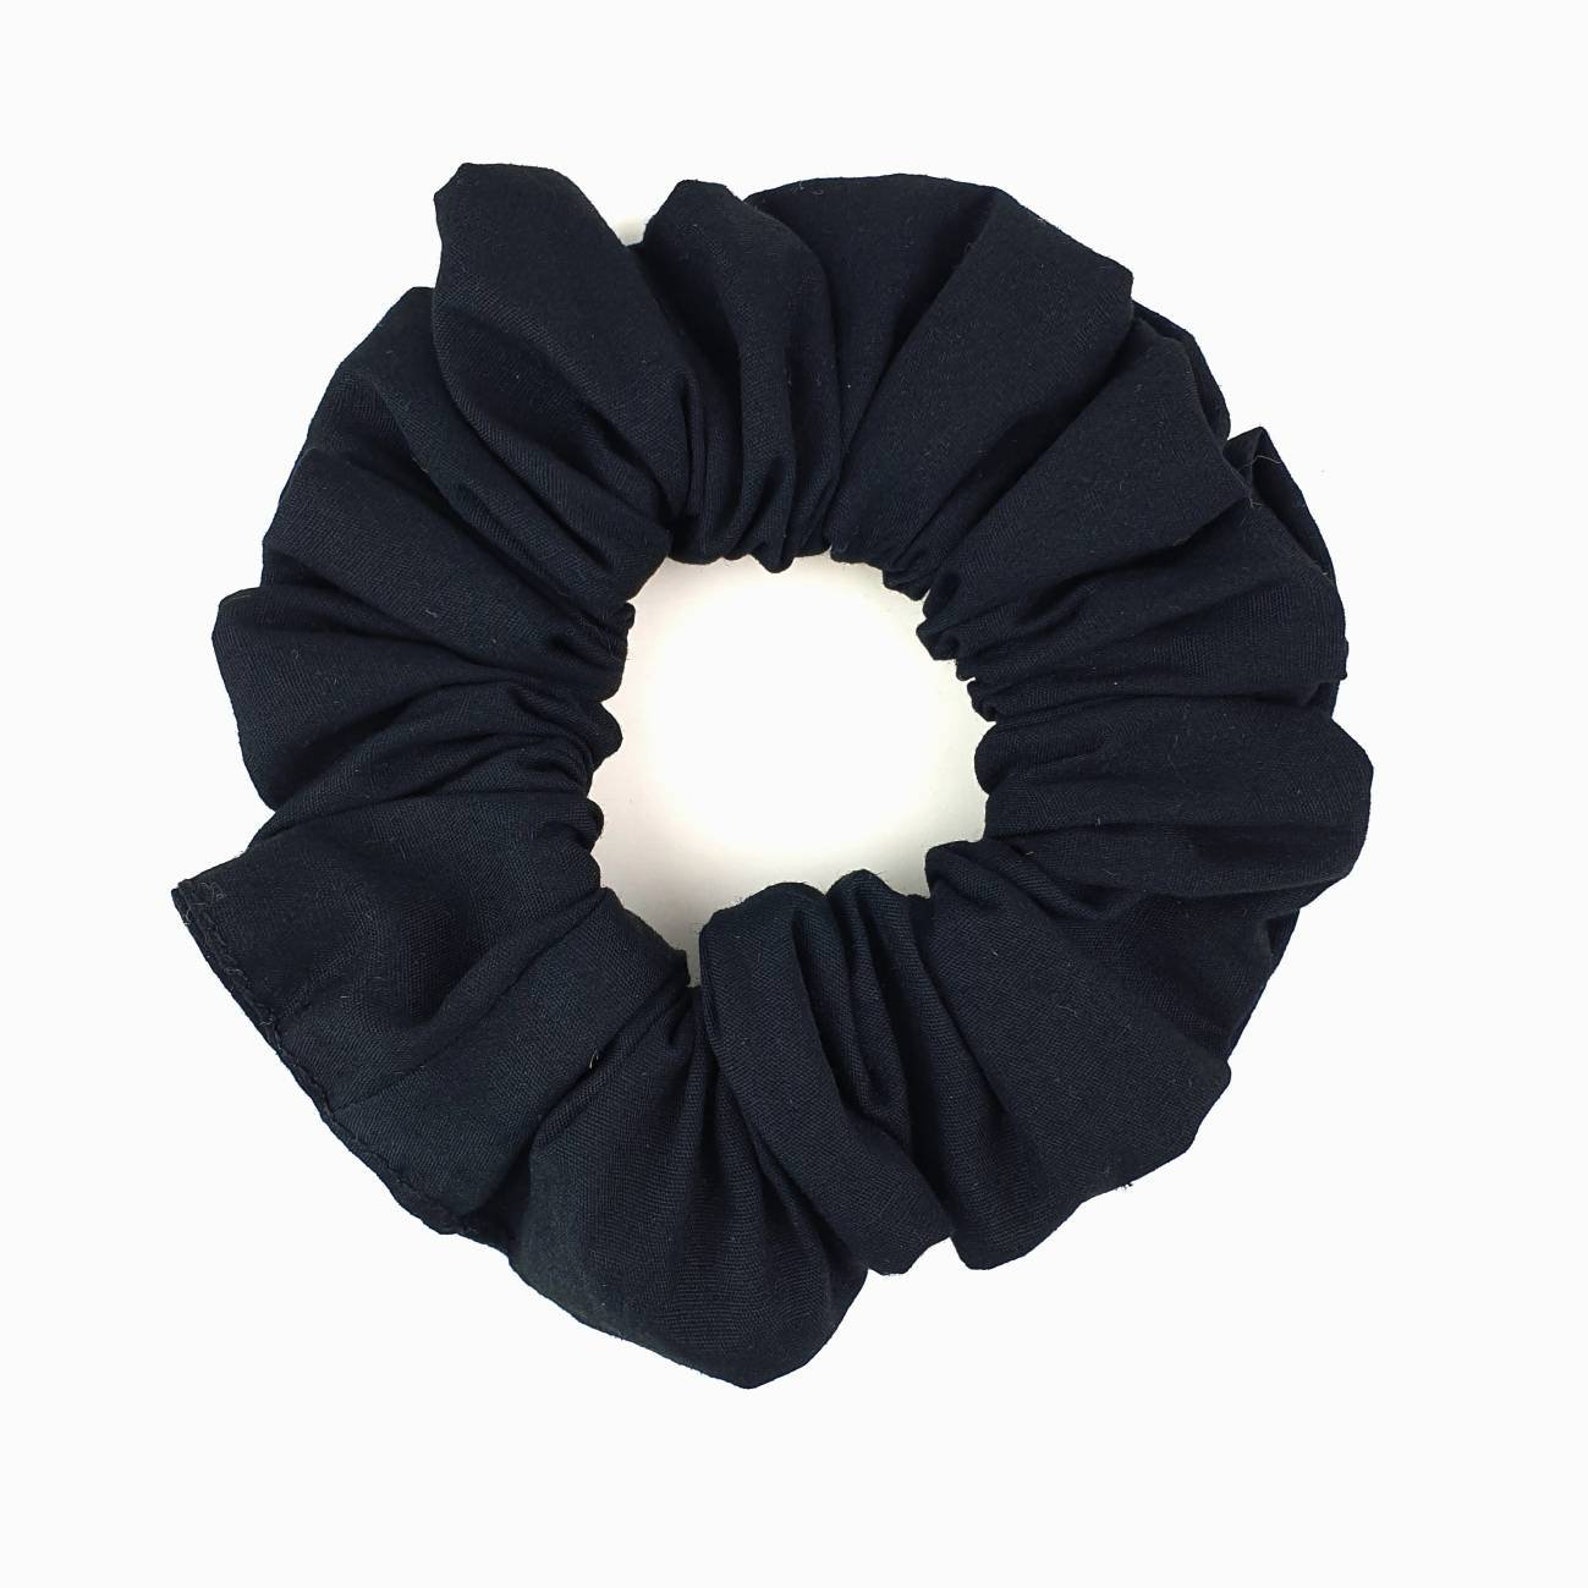 Classic Black Scrunchie for Hair Ladies Work Accessory for | Etsy